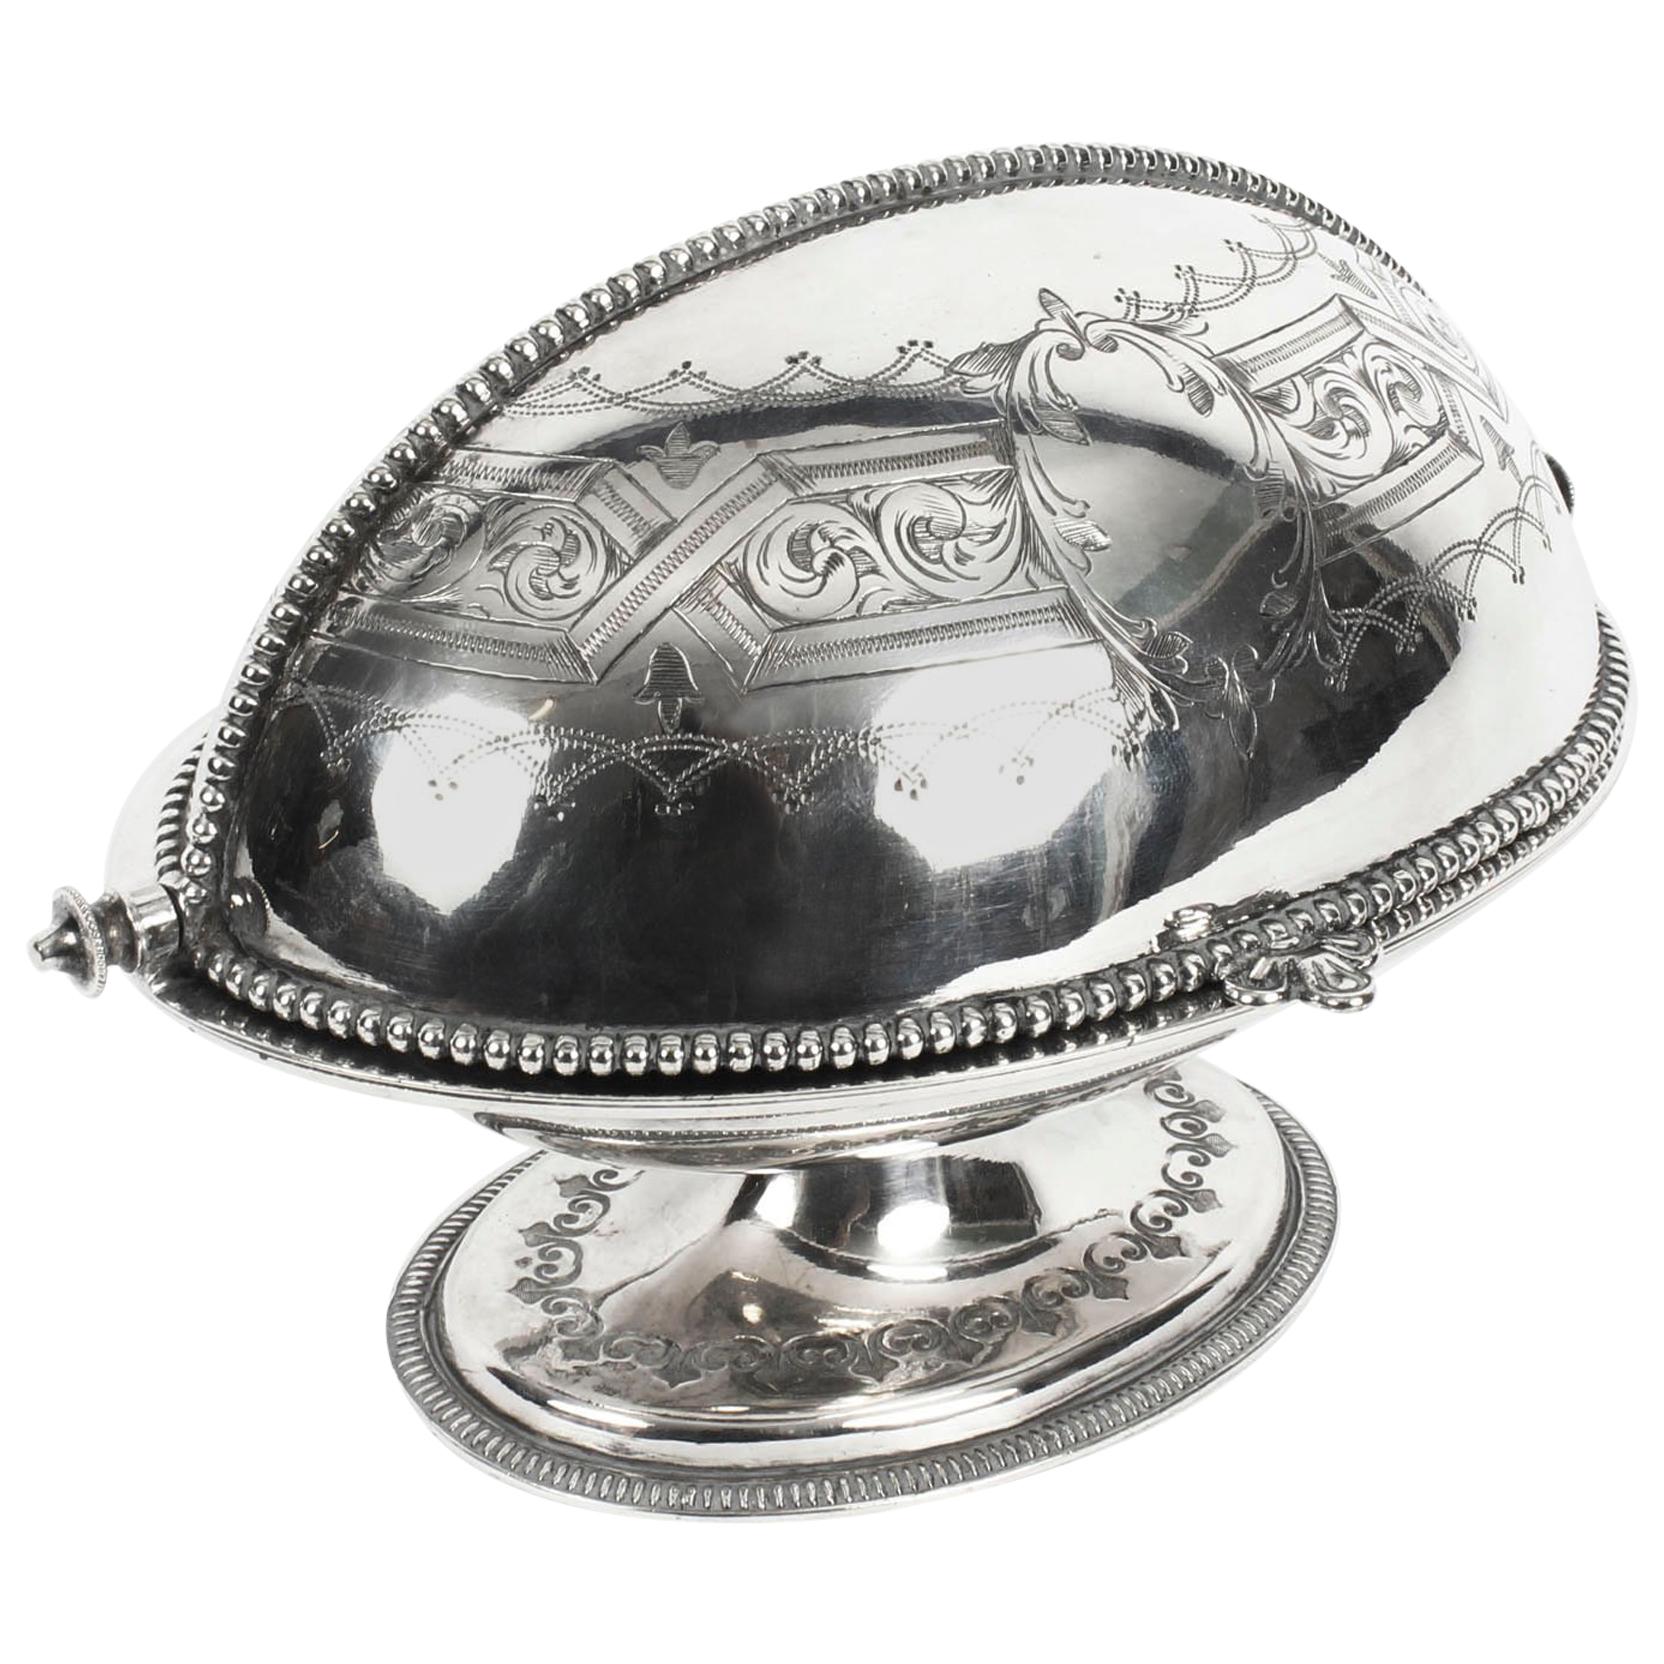 Antique English Silver Plated Roll Over Butter Dish, 19th Century